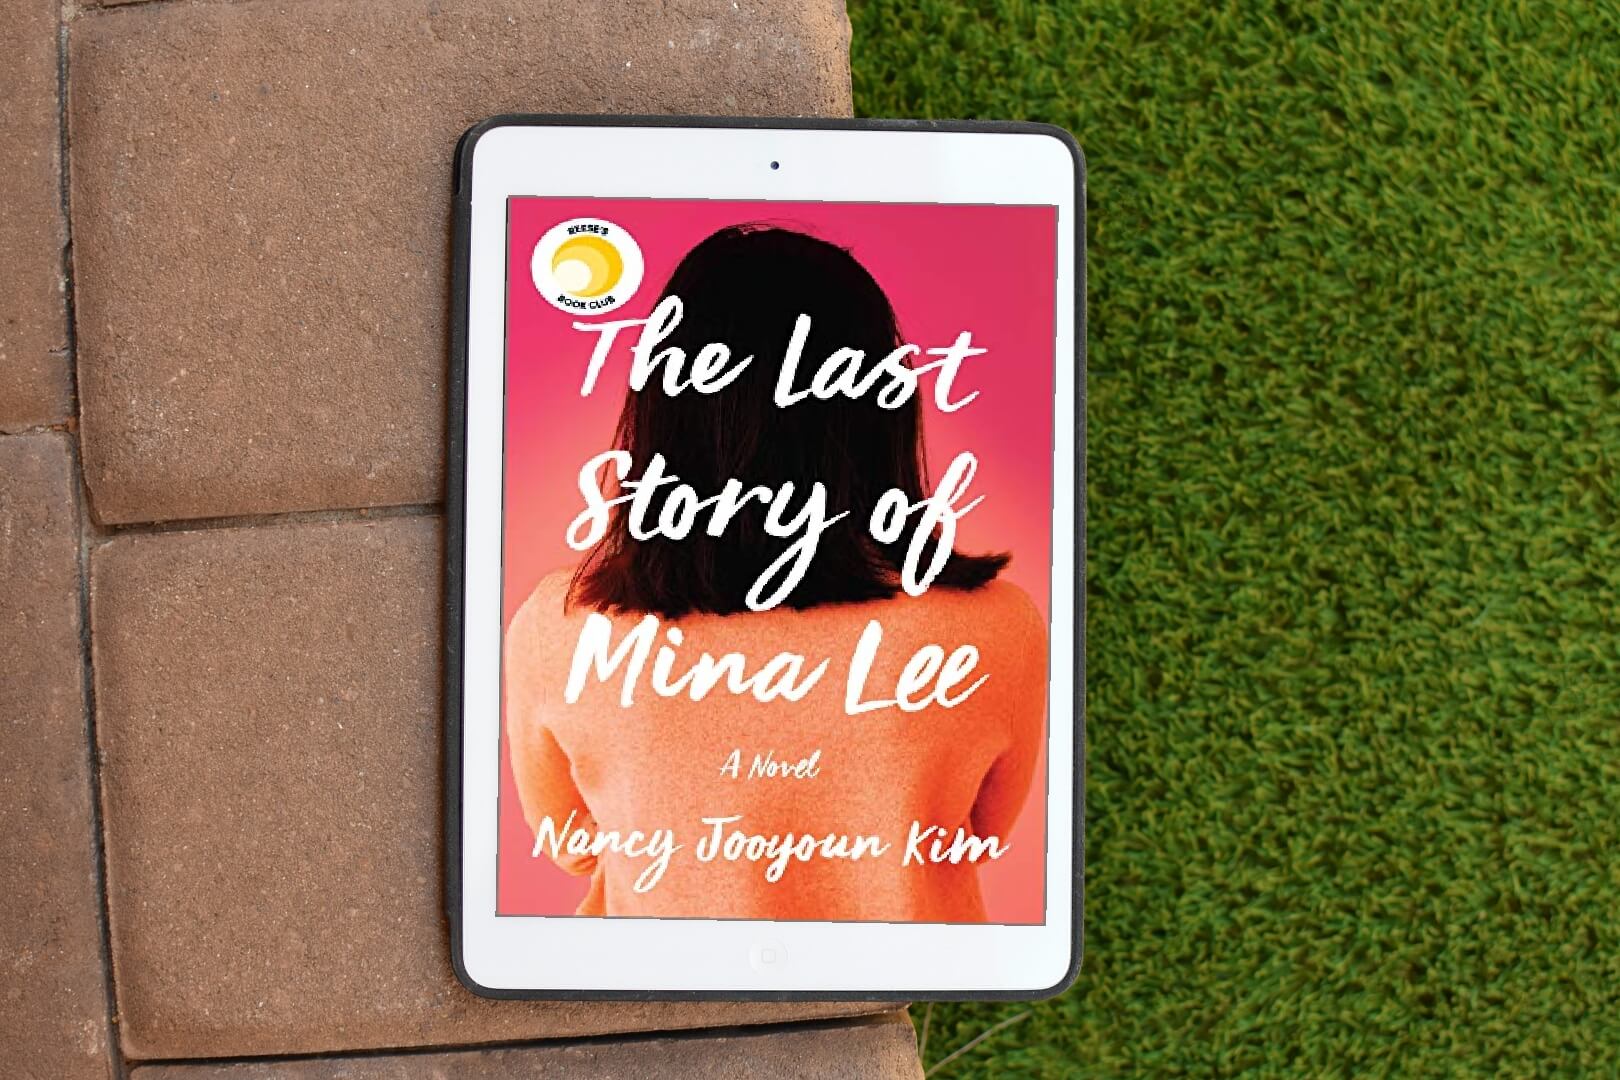 Book Club Questions for The Last Story of Mina Lee by Nancy Jooyoun Kim